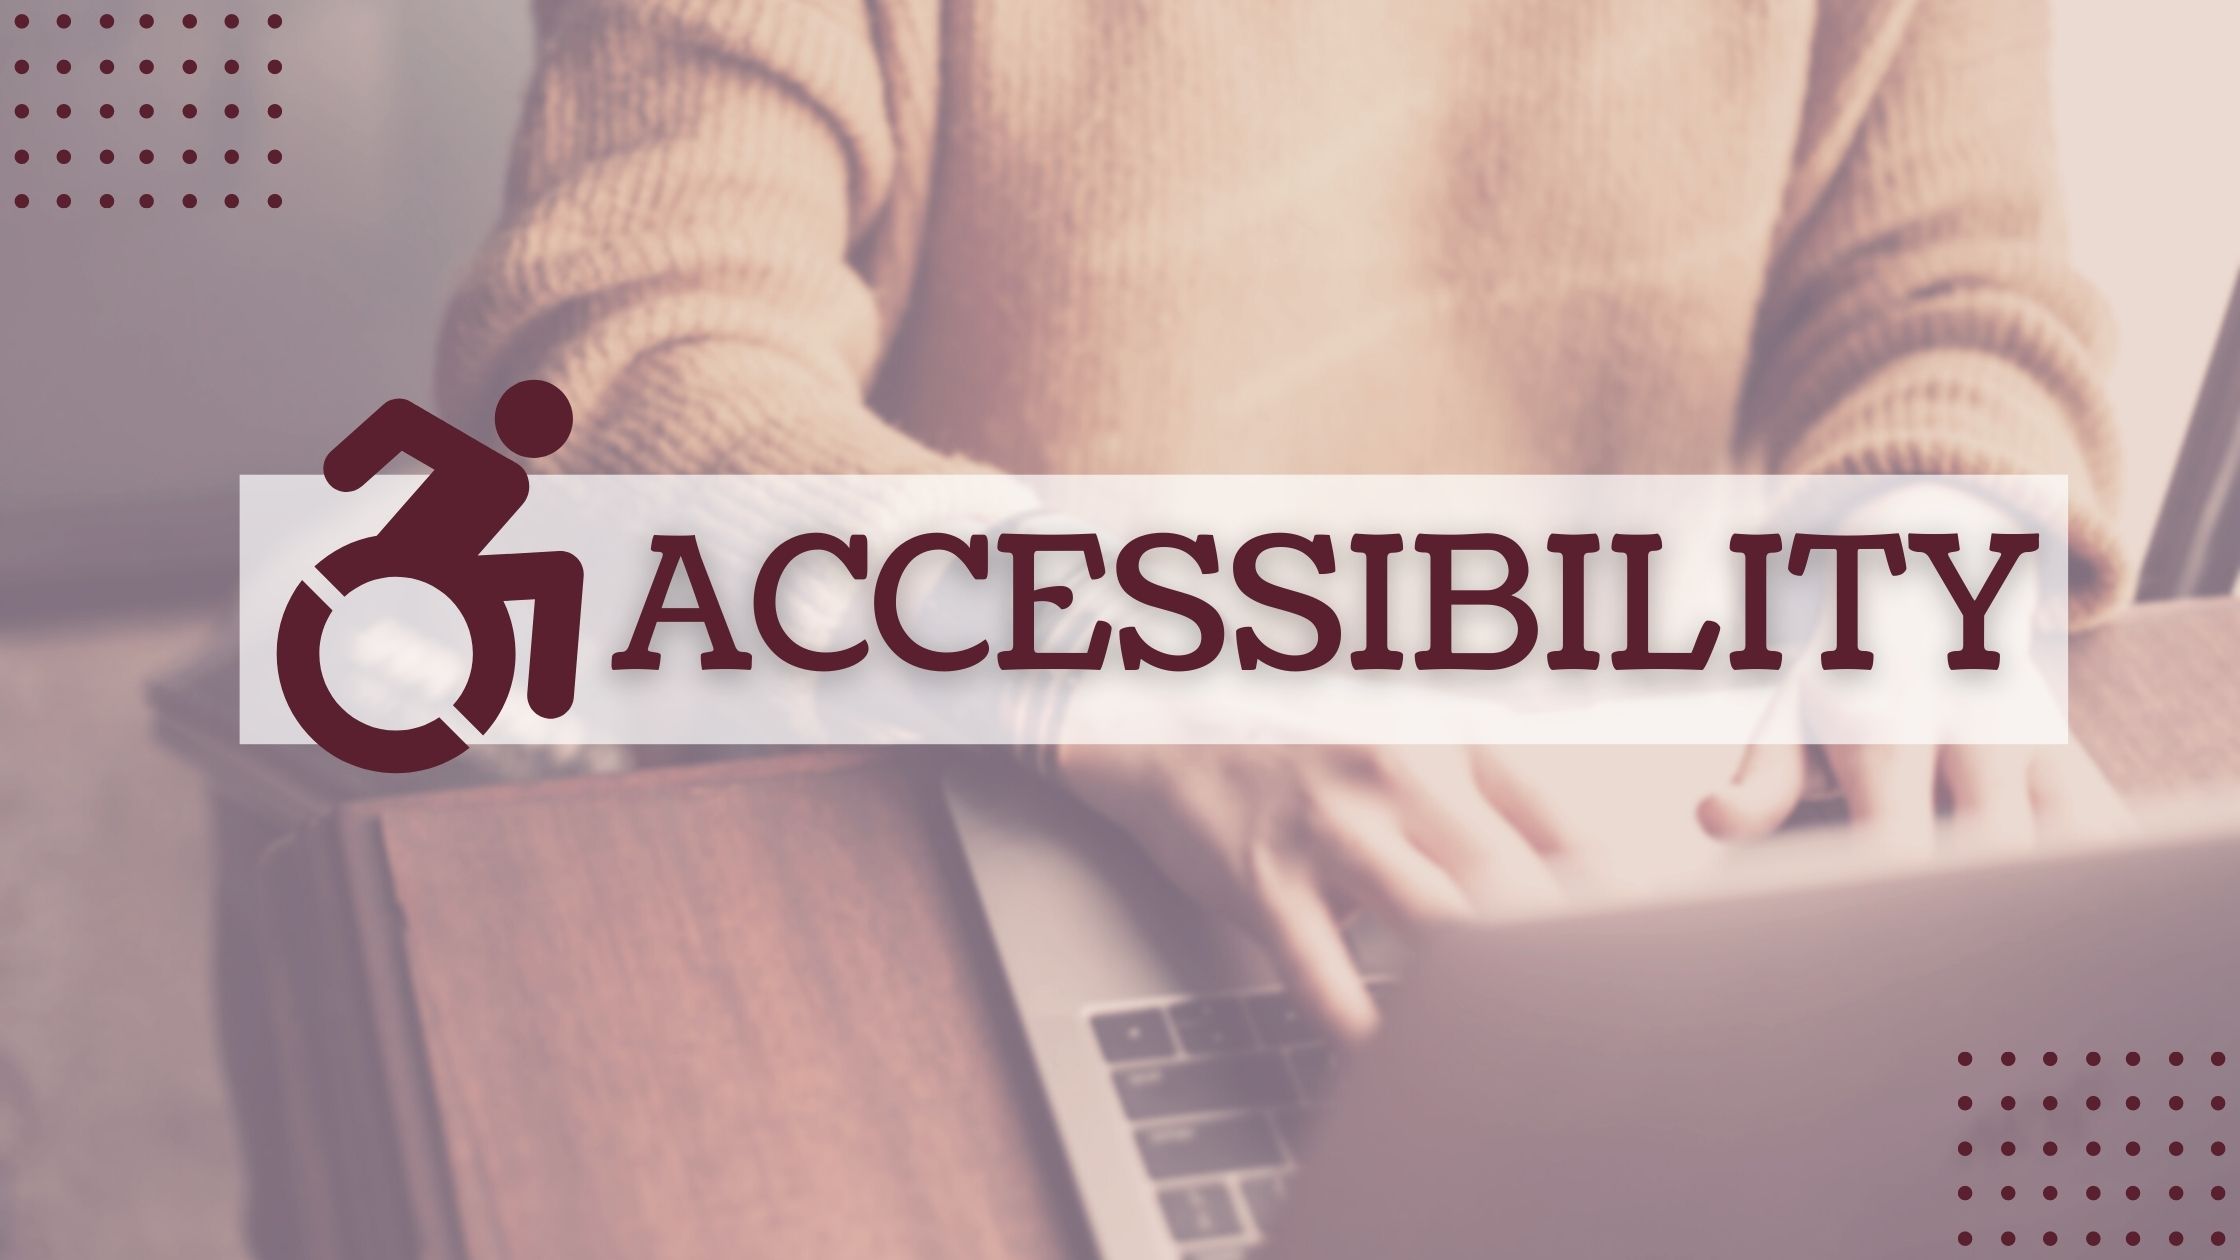 Accessibility - the Quick & Dirty Version